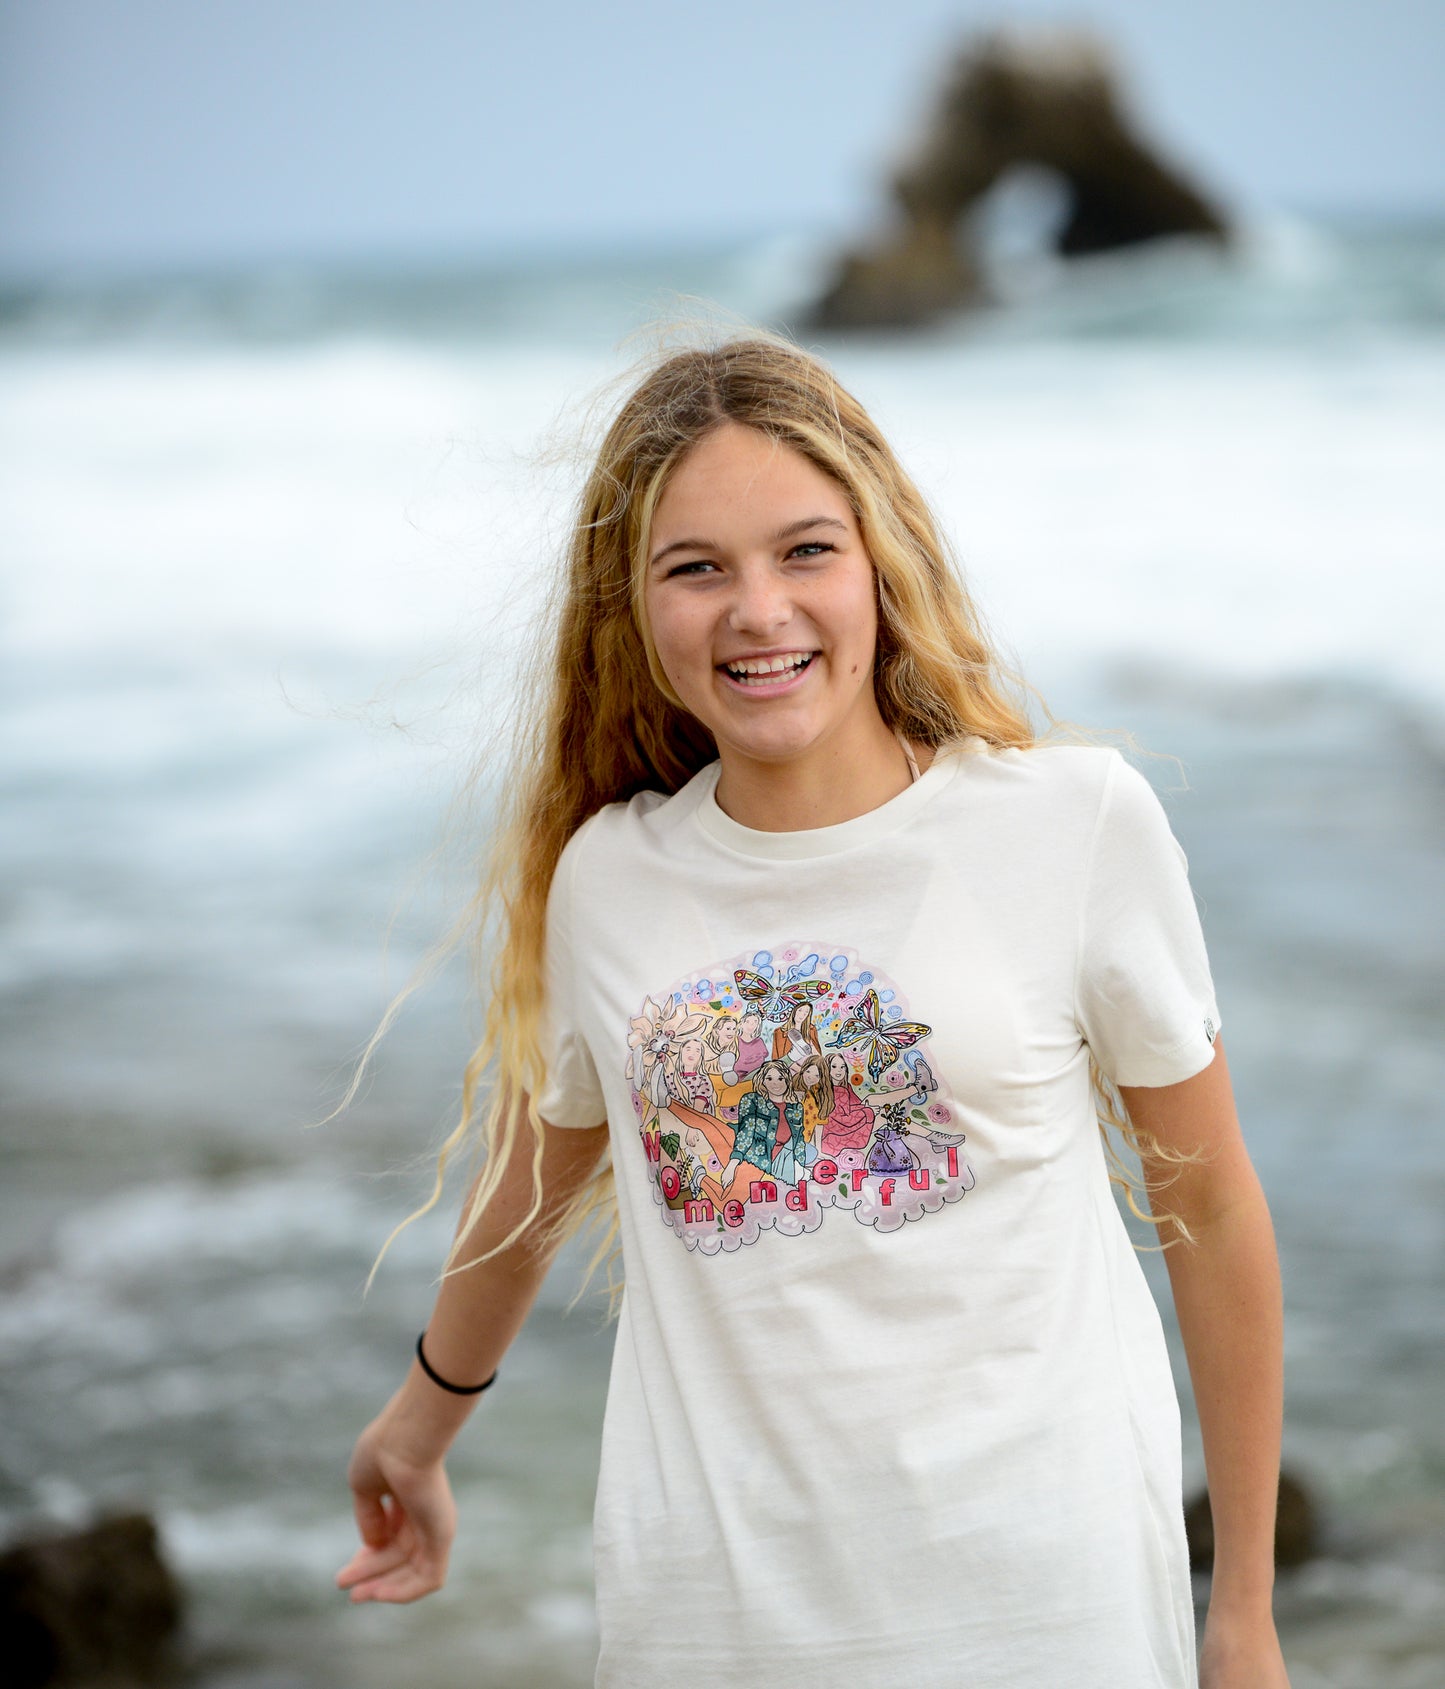 North Shore Girls illustrated t-shirt of strong happy women. Womenderful slogan. Cotton Beach style t-shirt